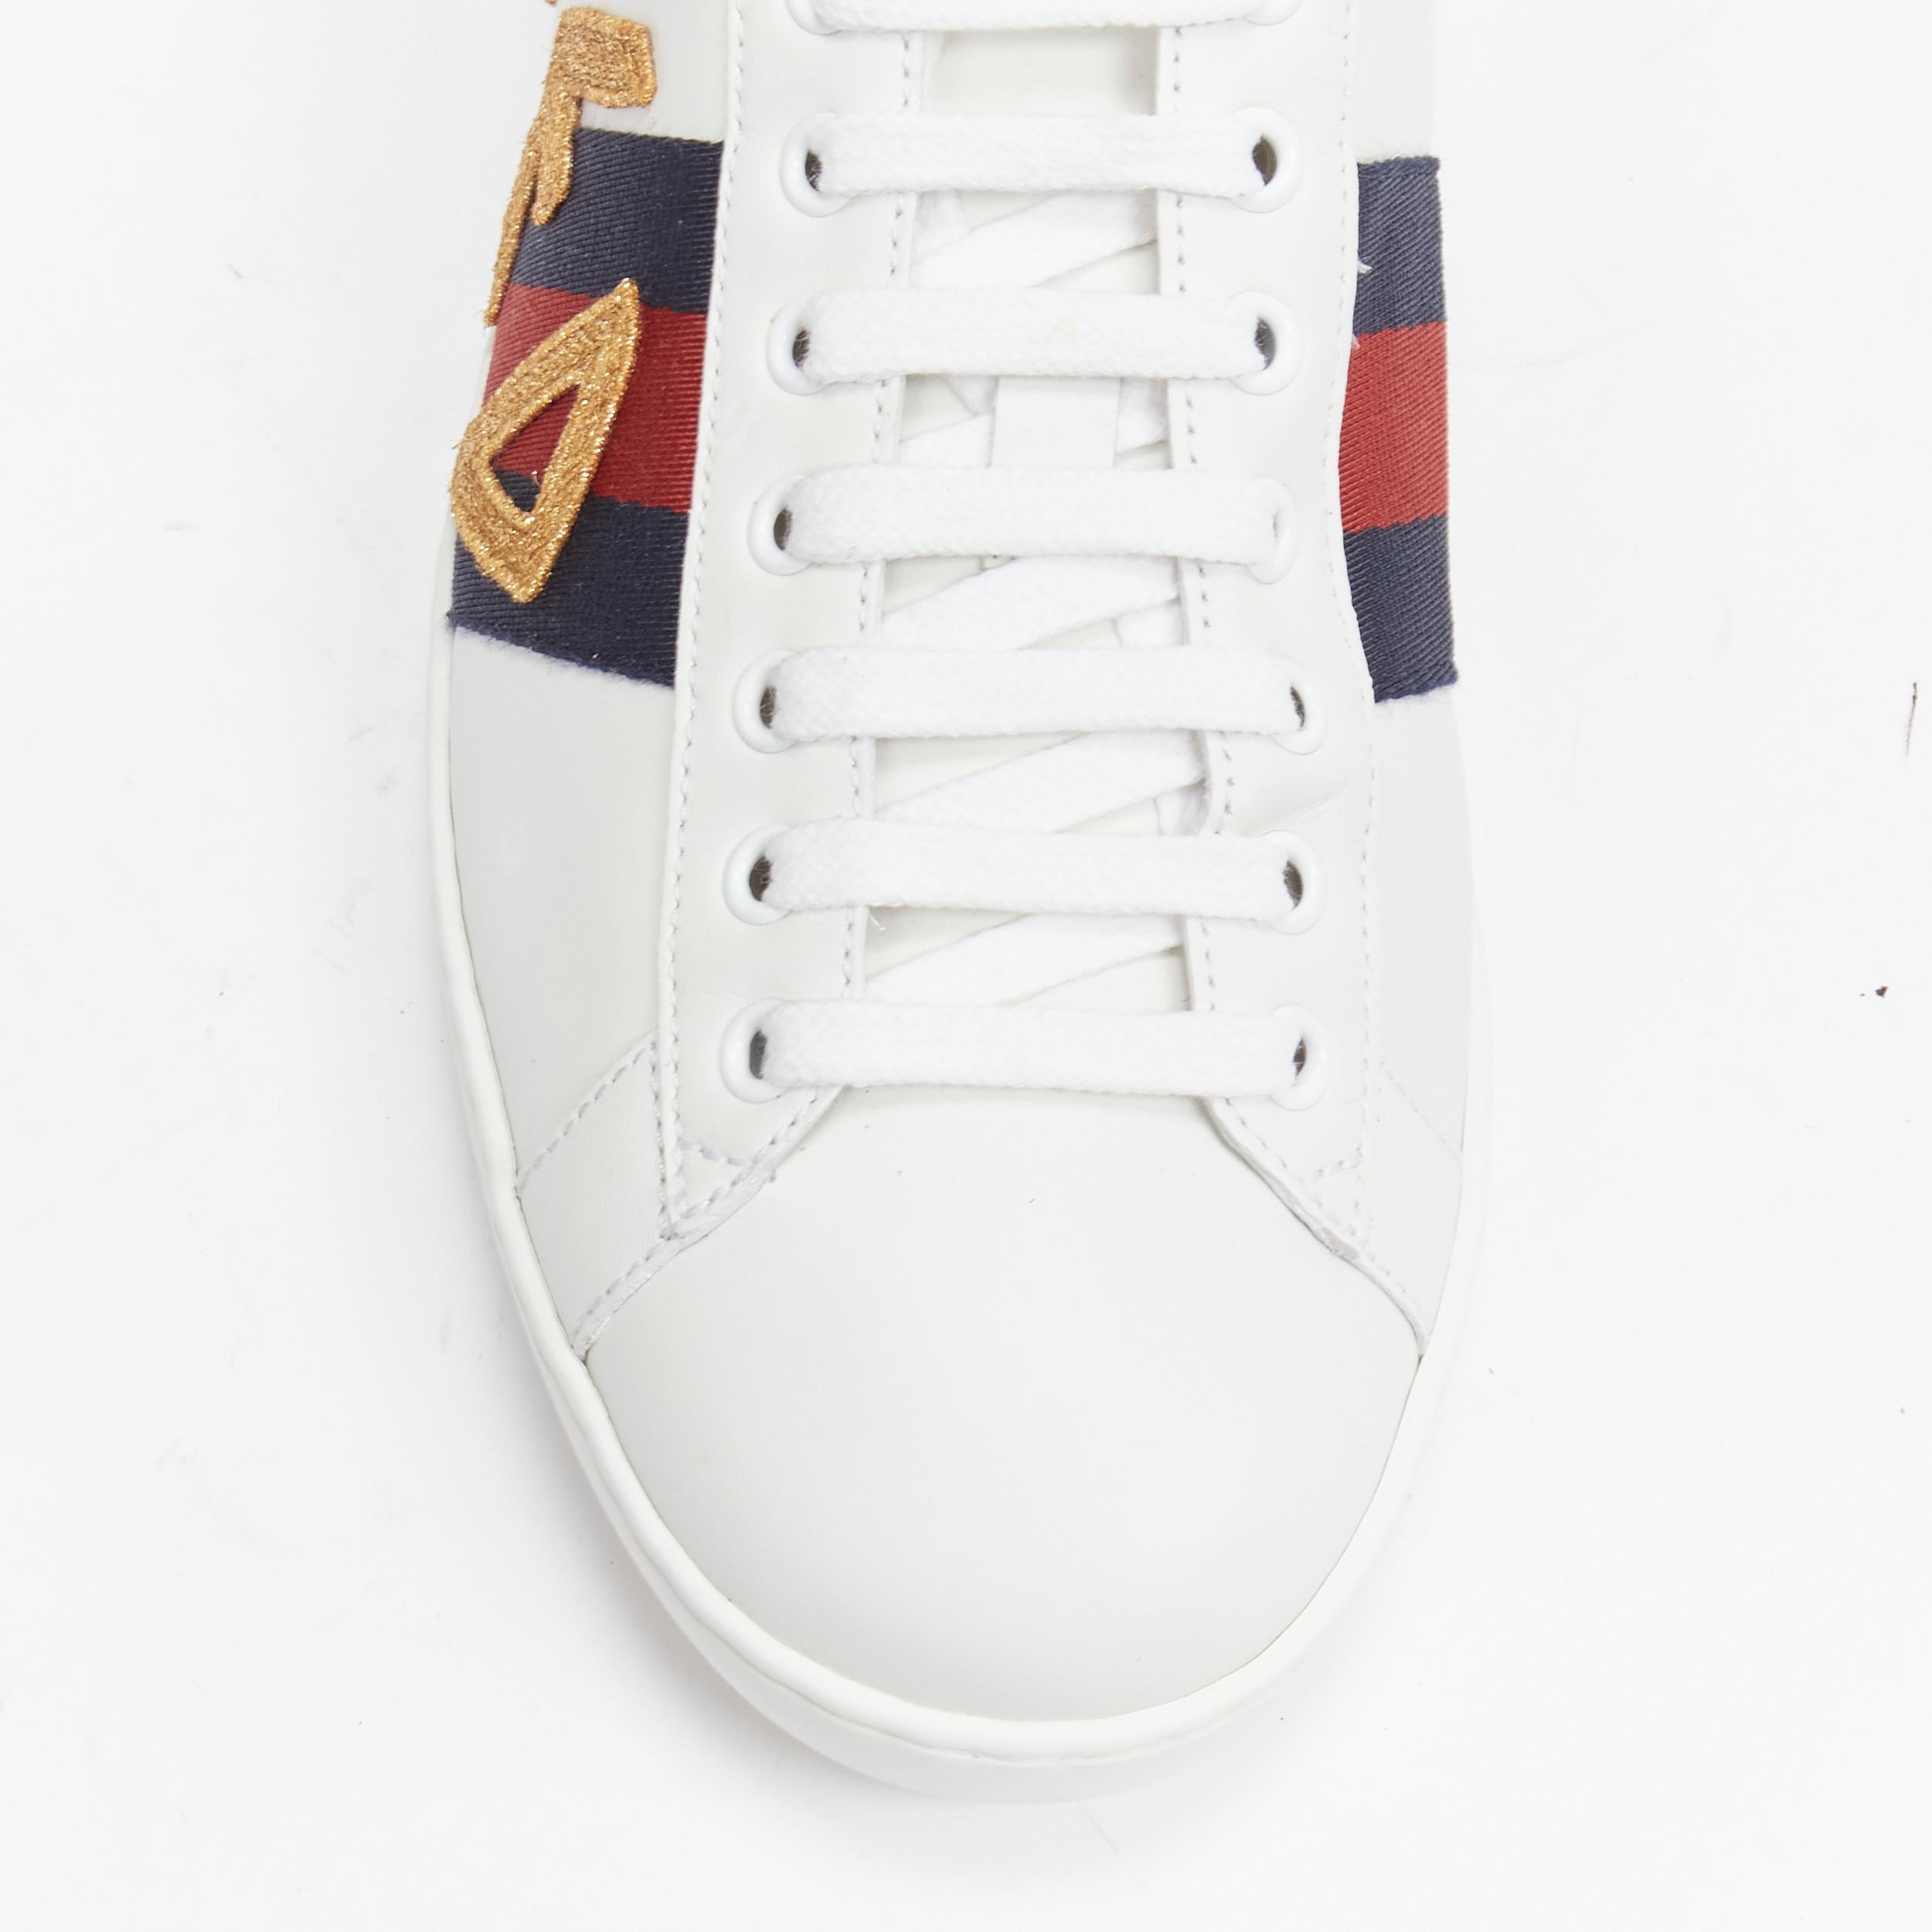 GUCCI Ace Loved gold embroidered blue red web leather sneakers UK7 EU41 For Sale 3